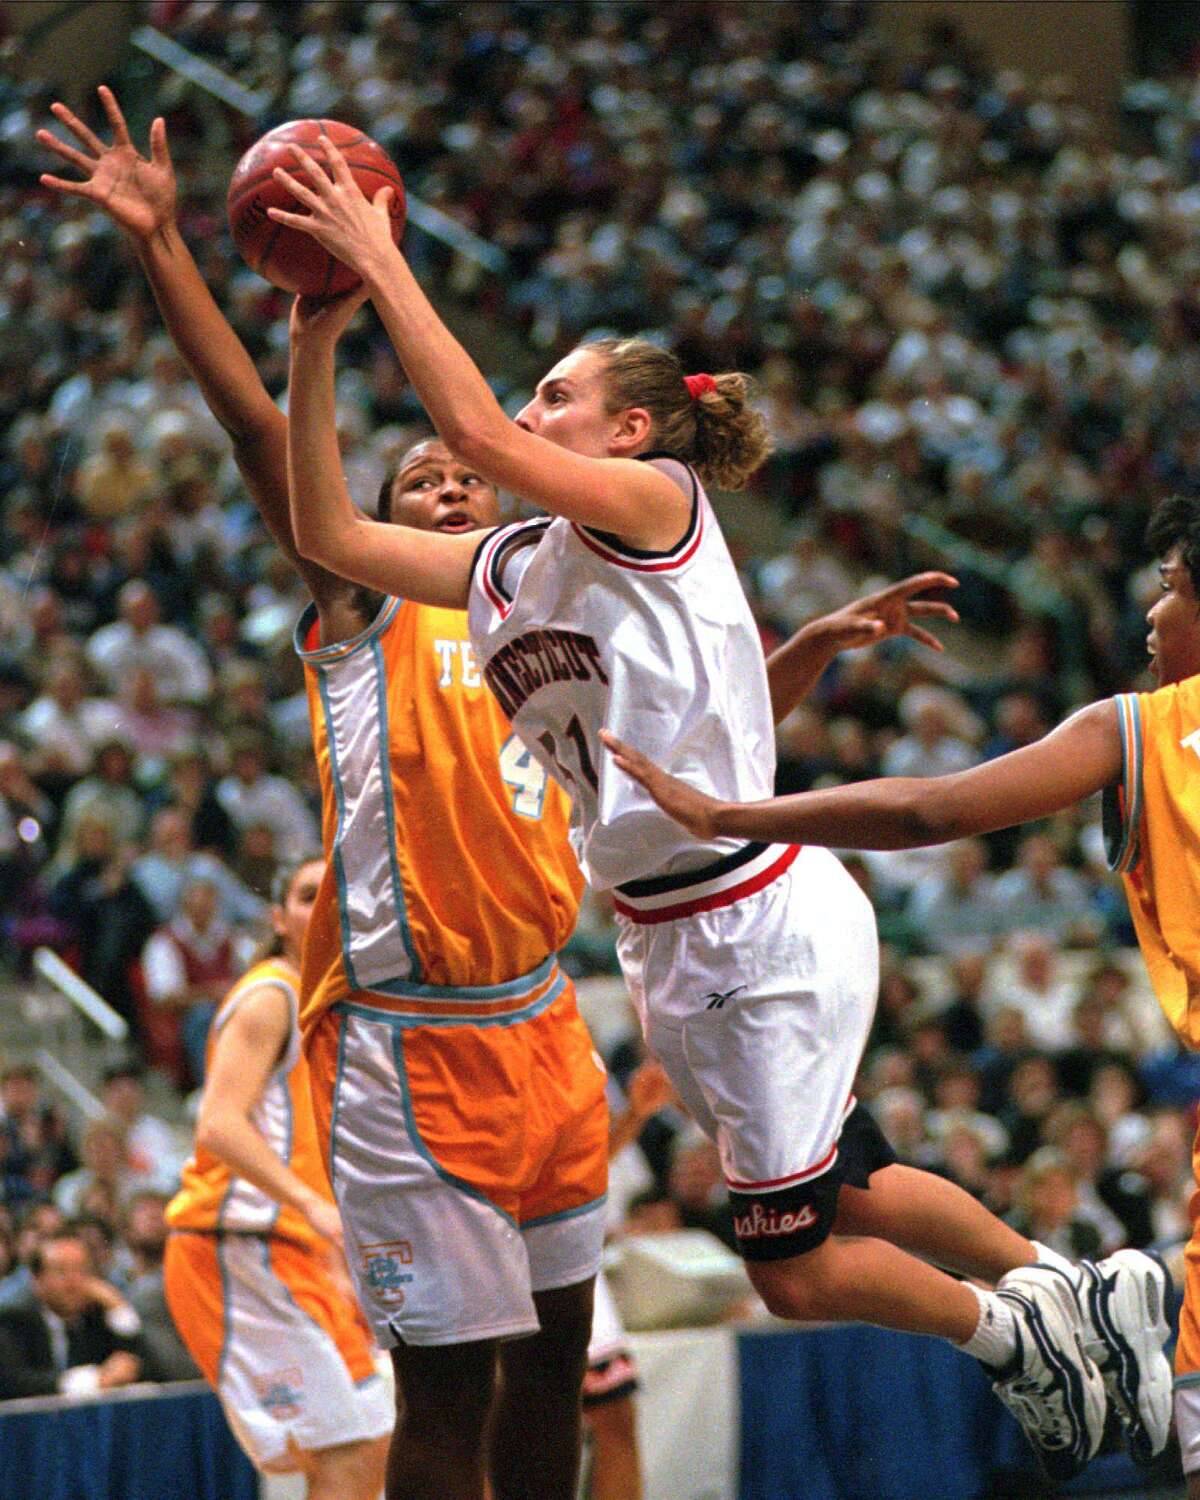 Former UConn player Carla Berube, center, shoots in front of Tennessee’s Tiffani Johnson in a 1996 game in Hartford.